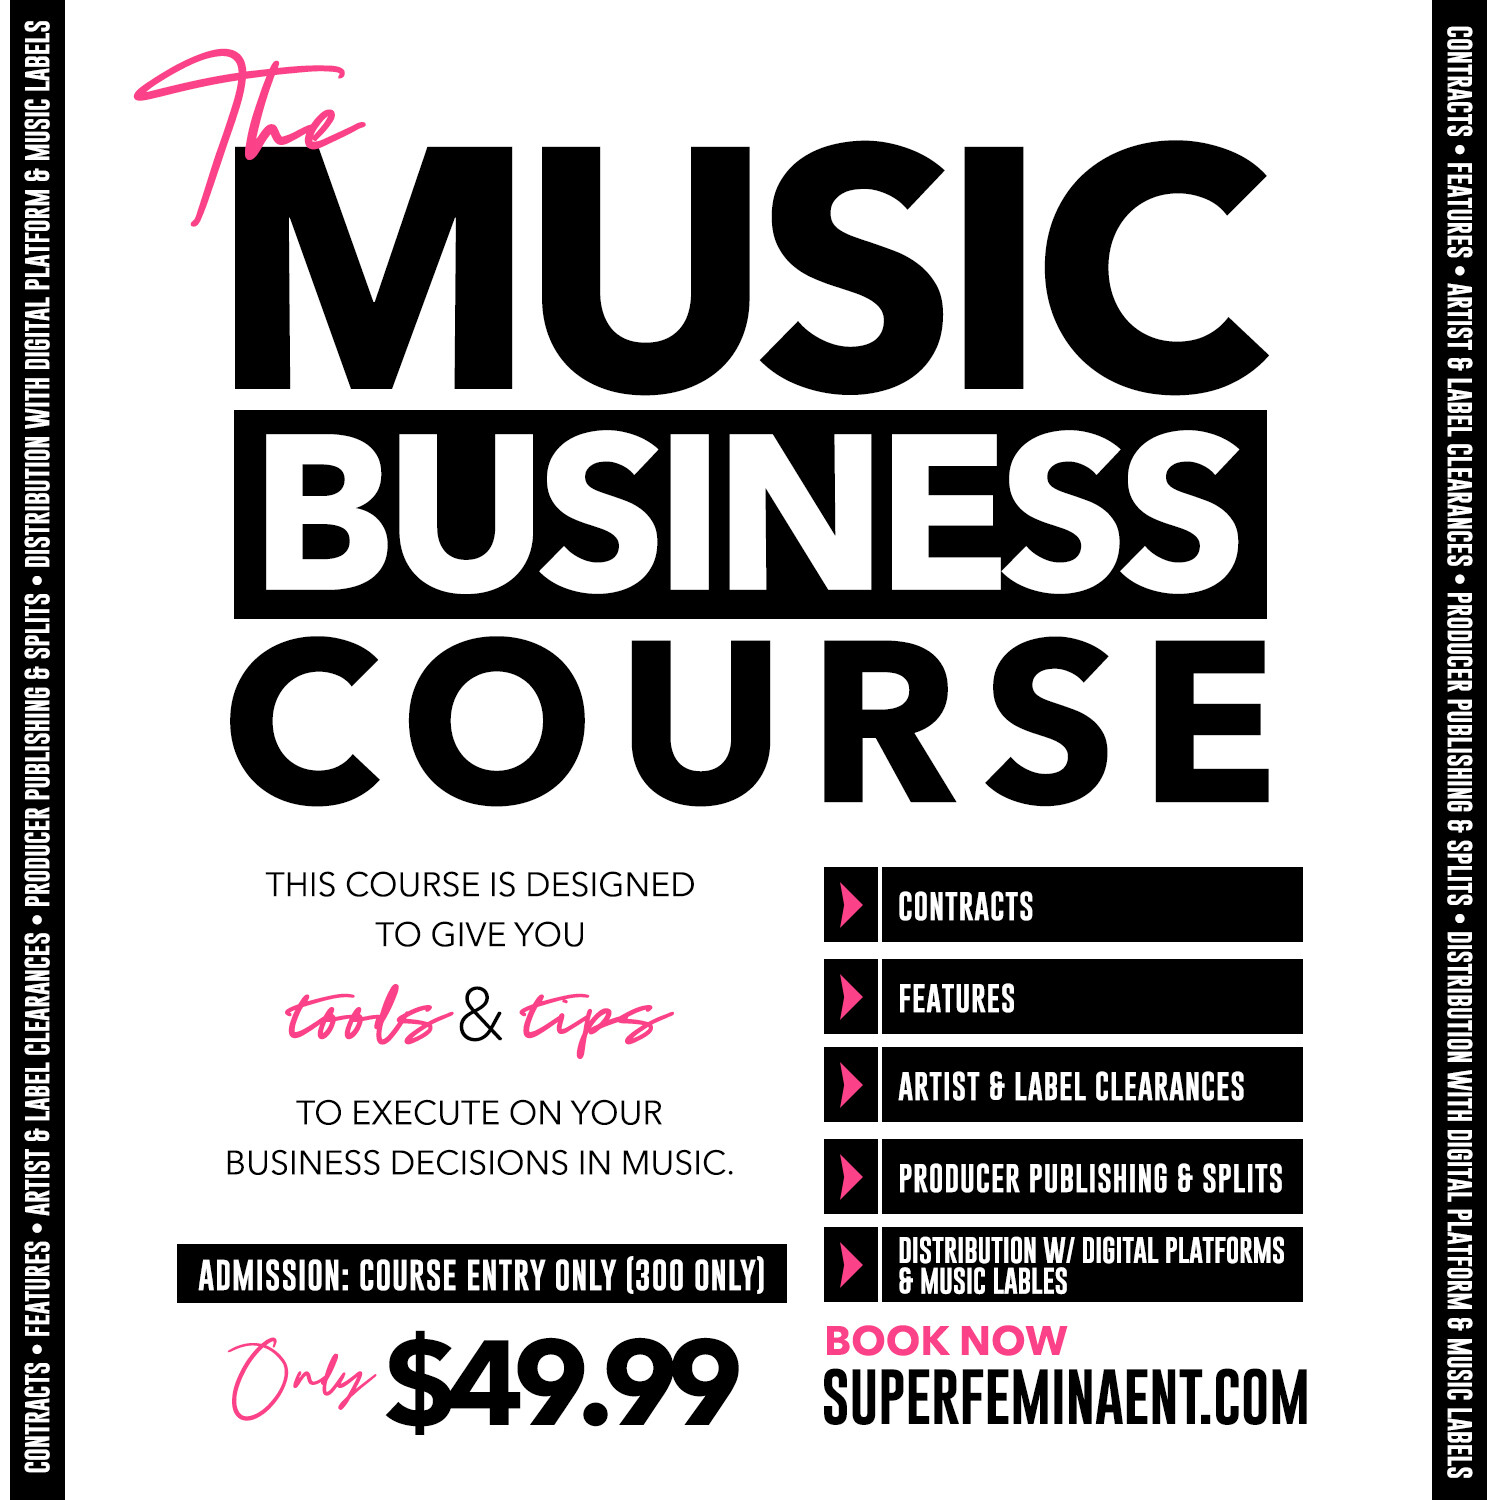 THE MUSIC BUSINESS COURSE